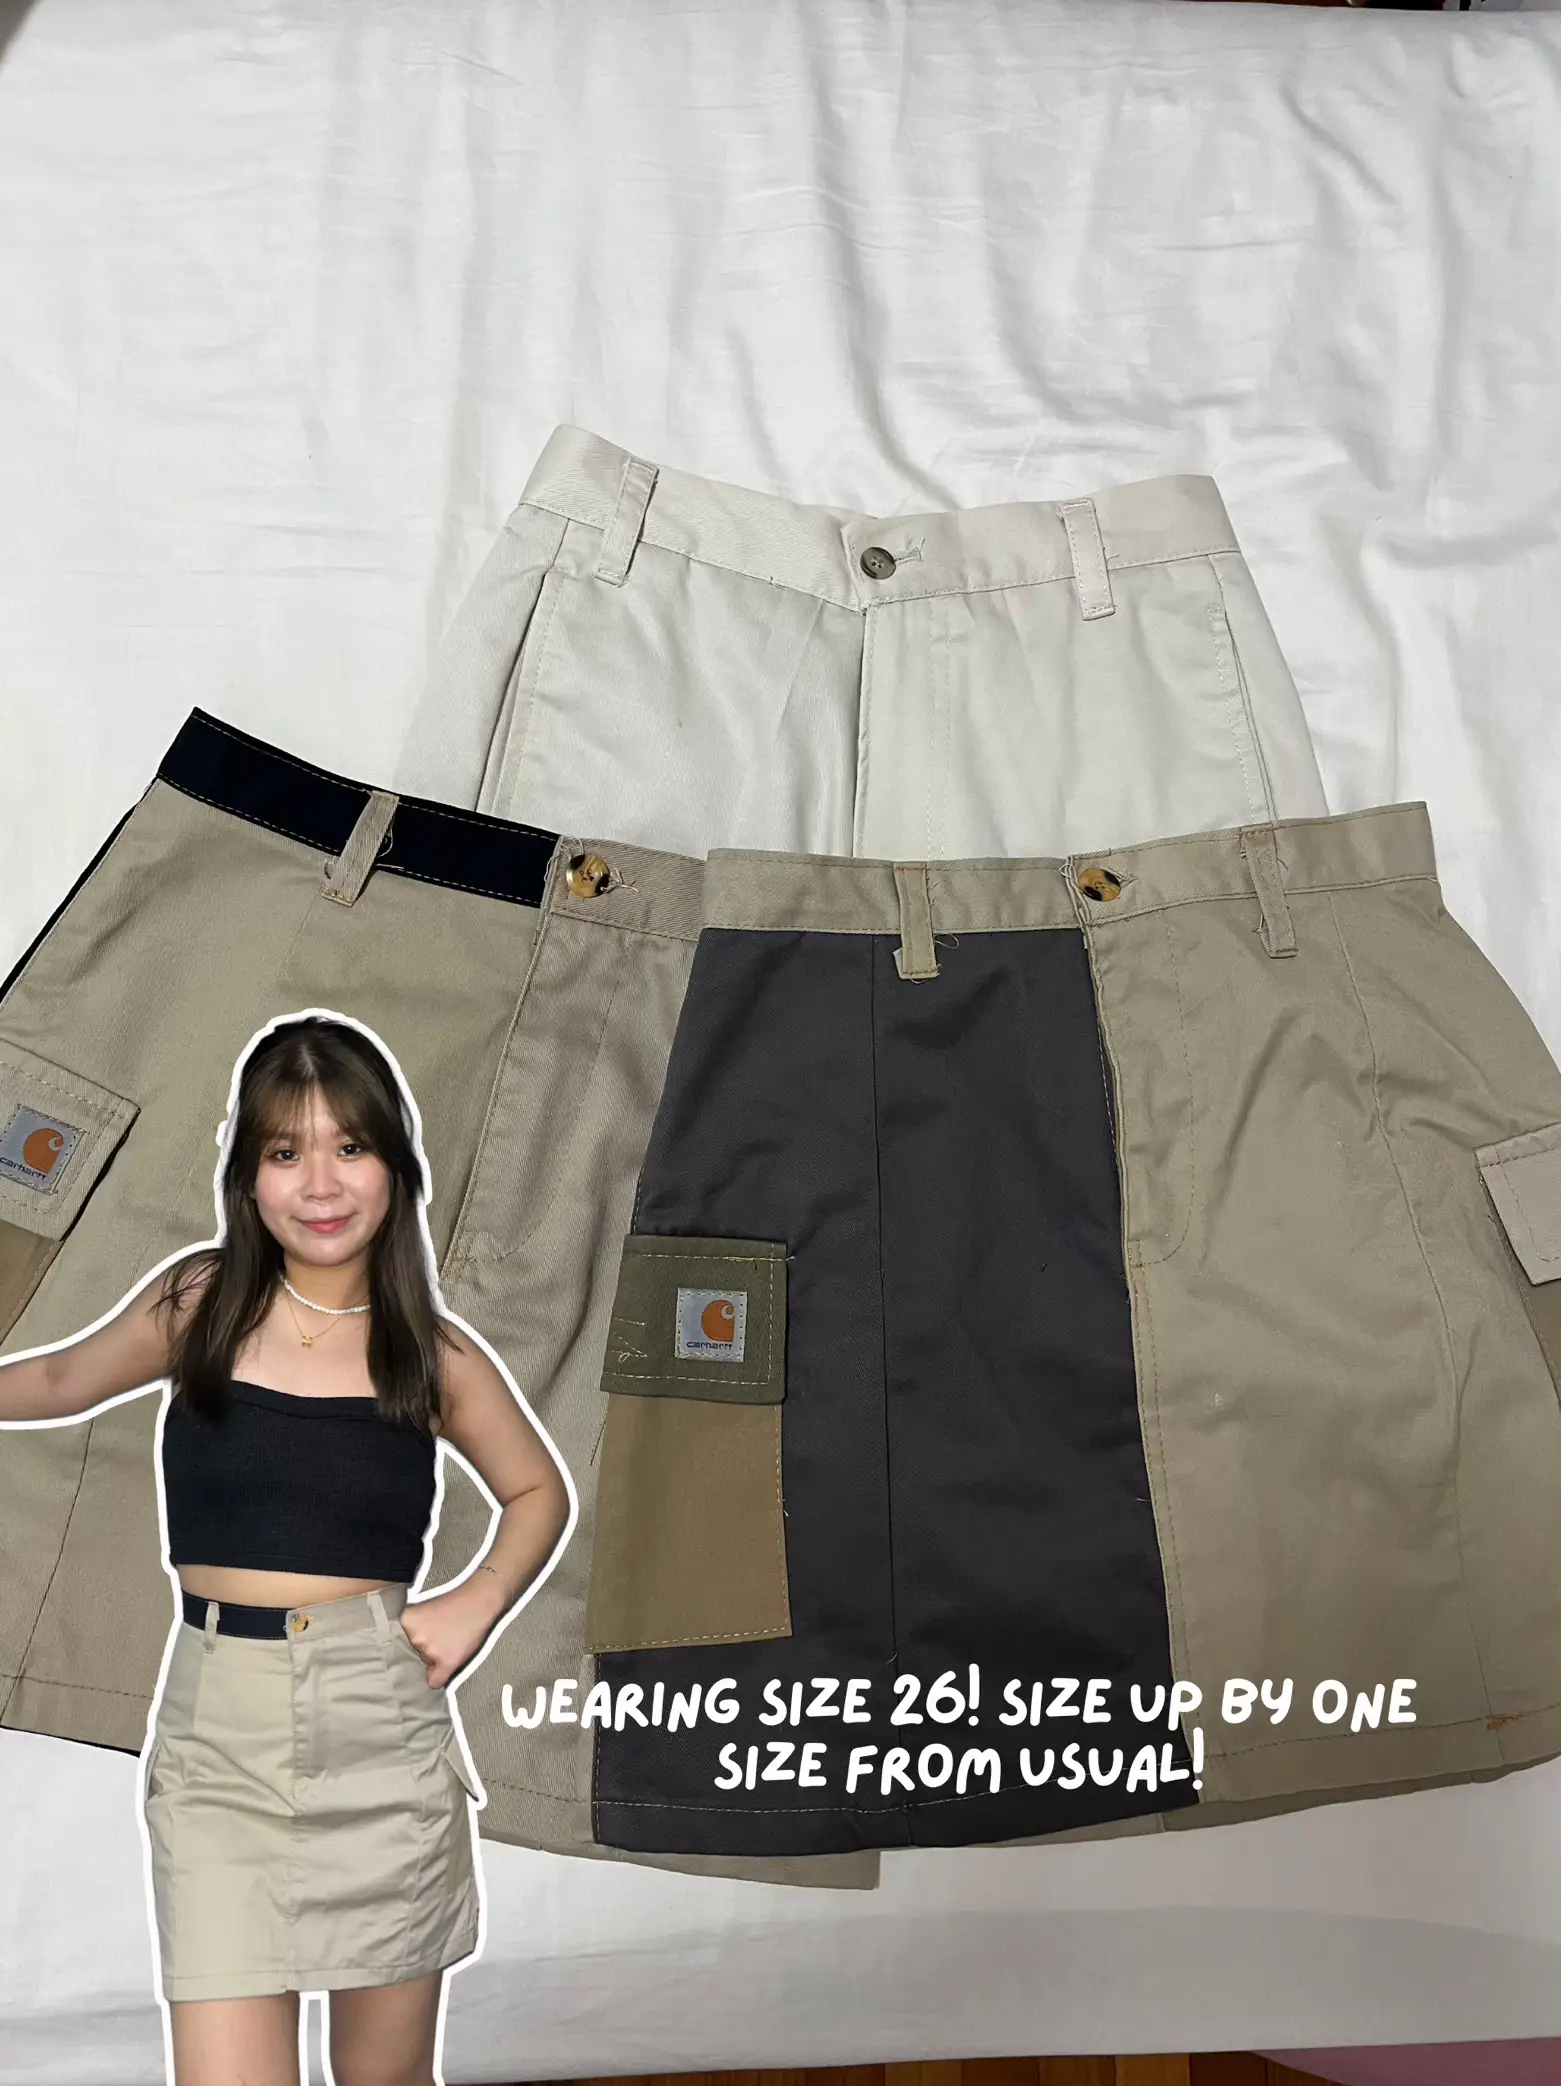 SAVE THIS! $6 CARHARTT REWORKED SKIRT 🇹🇭